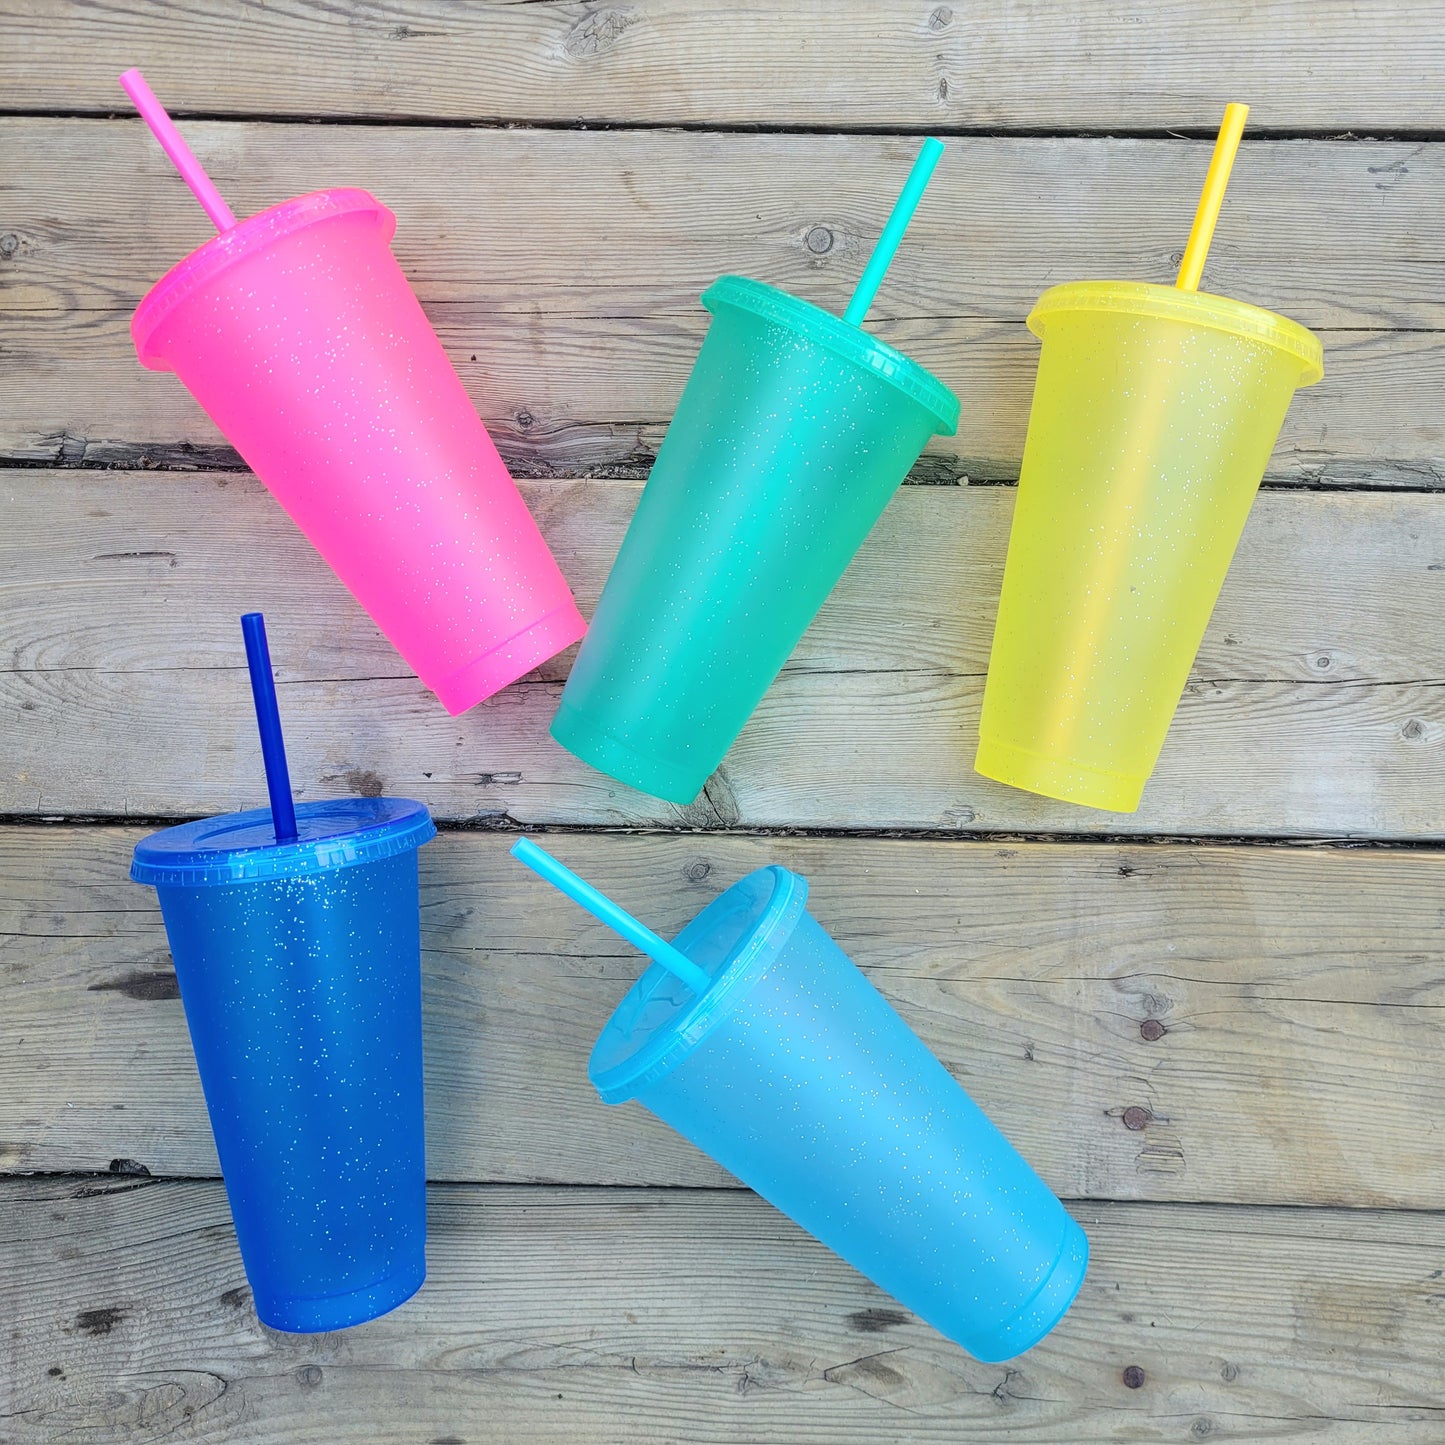 24 oz Spring Cold Cups, 5 sets: Blue, Light Blue, Pink, Yellow and Green, Perfect for Crafting, Wholesale Blank Tumblers Canada